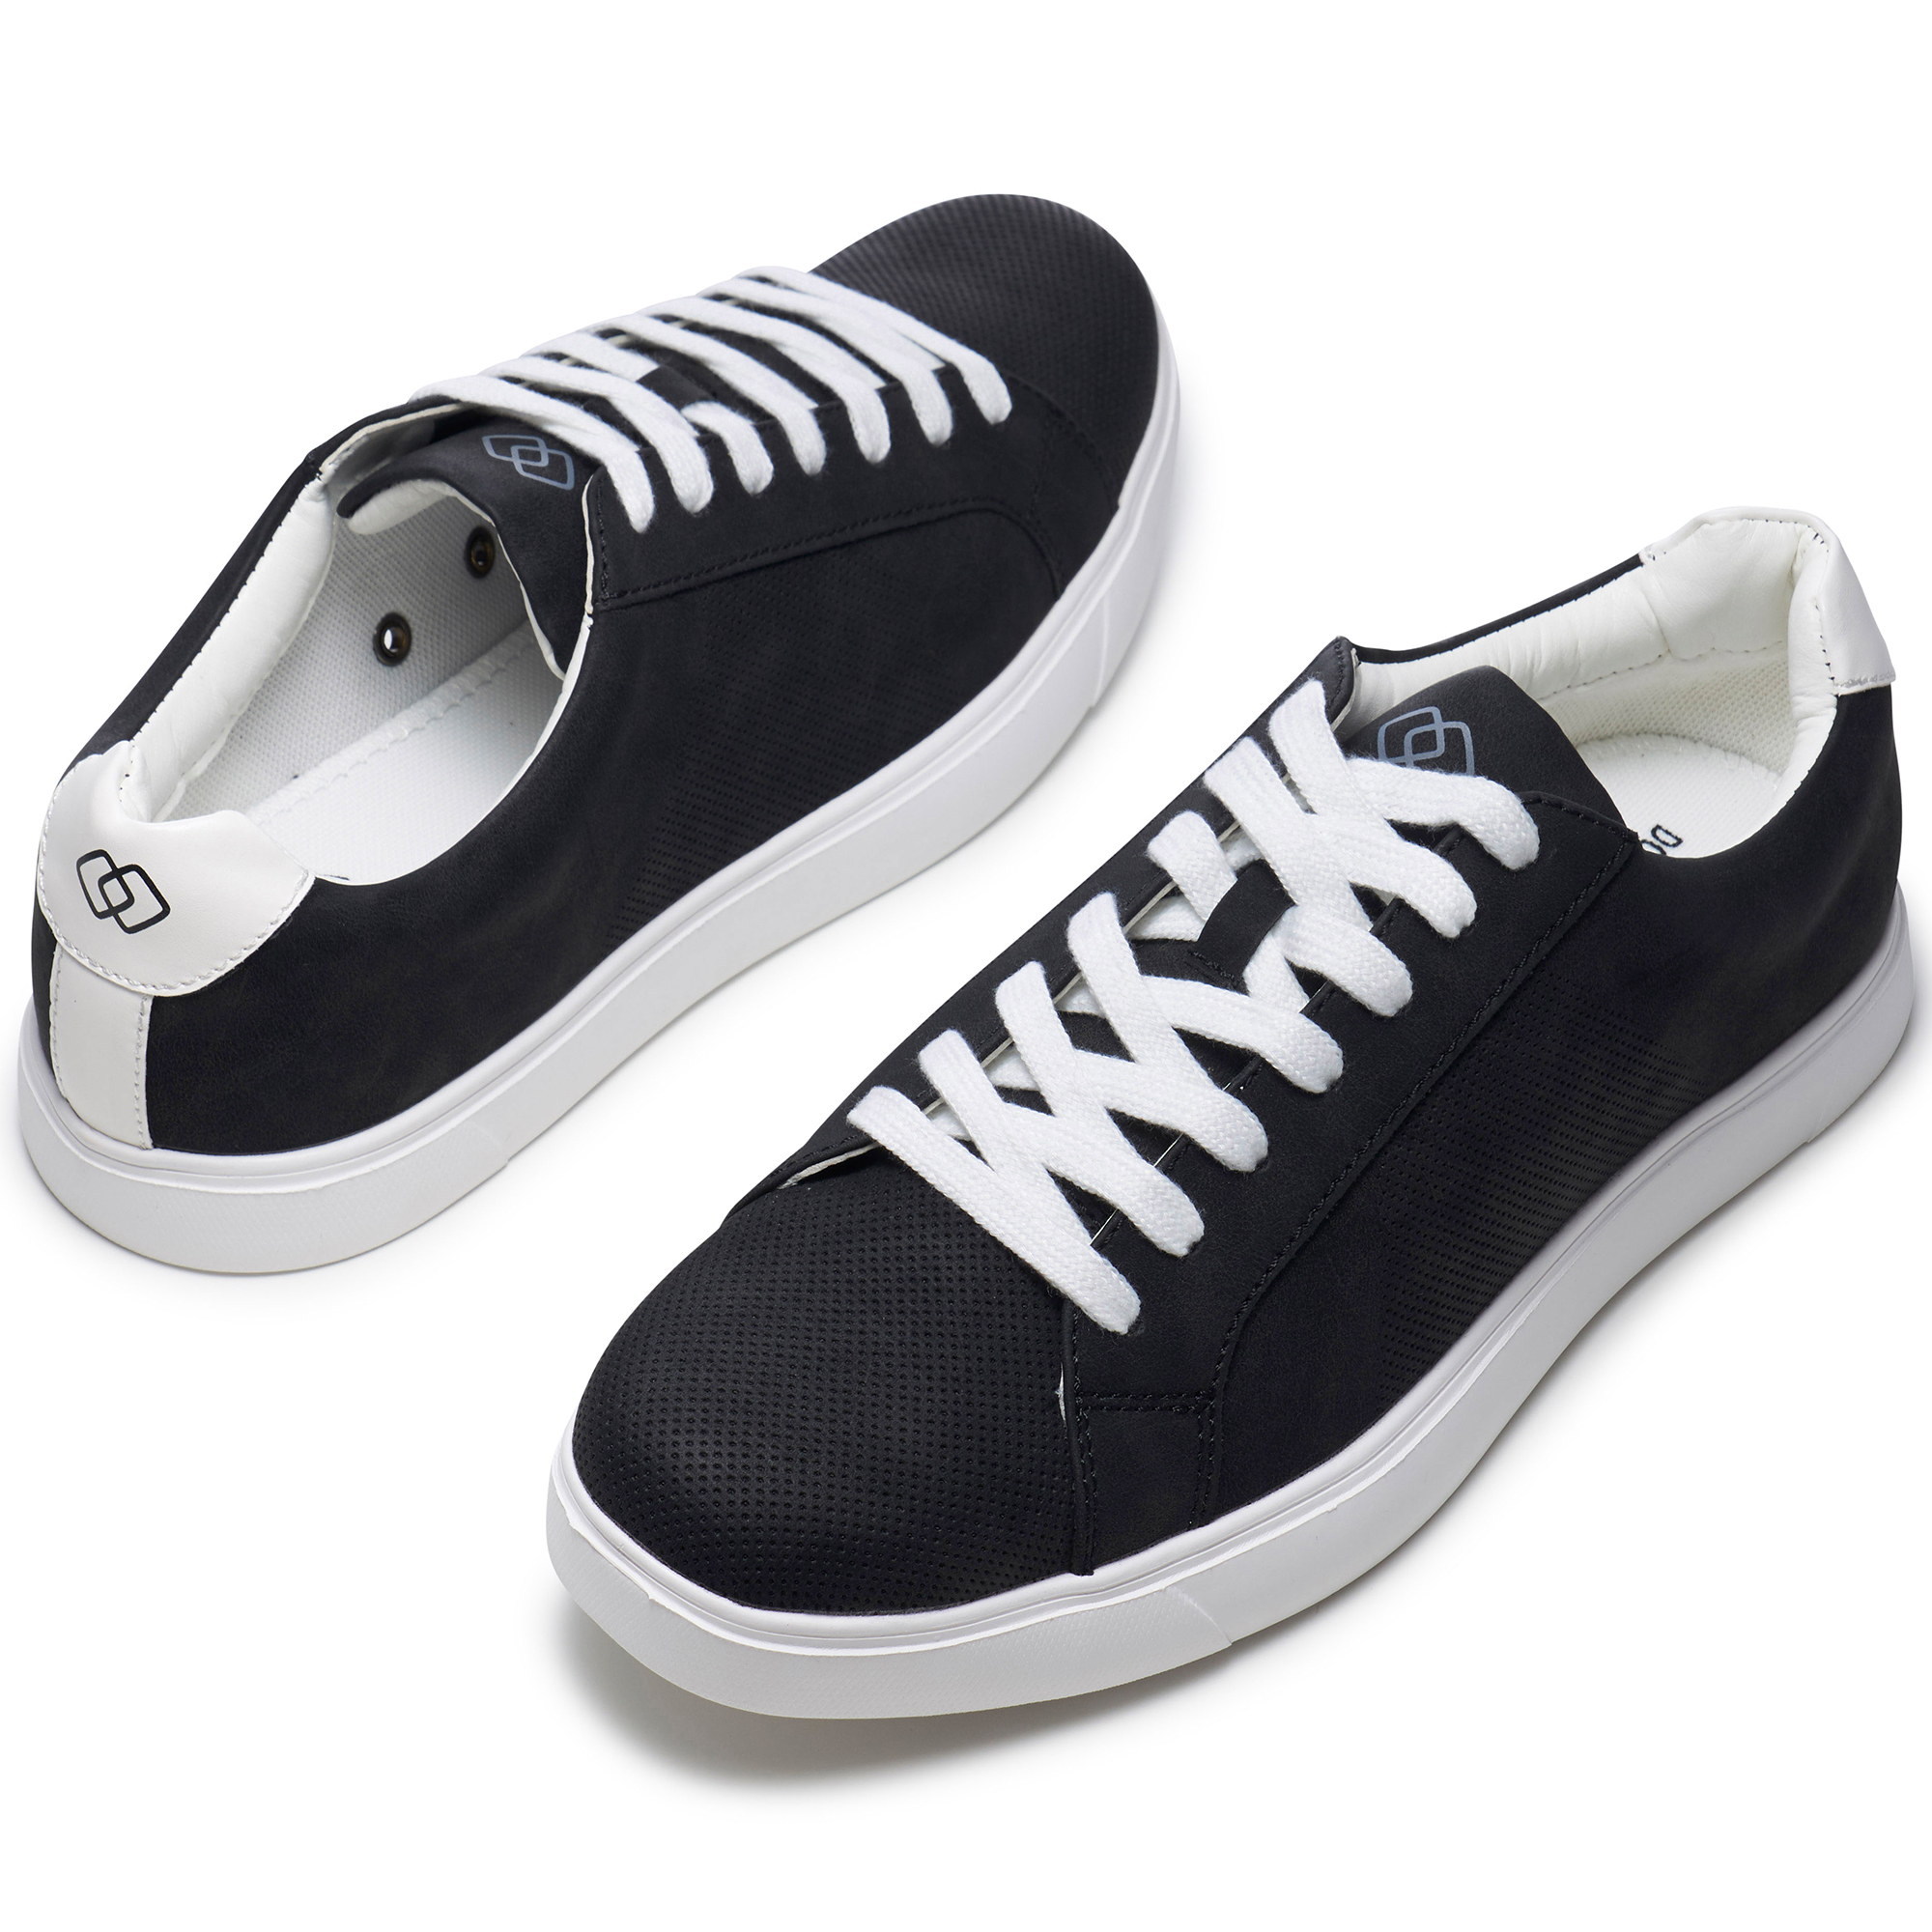 Alpine Swiss Ben Mens Smart Casual Shoes Low Top Sneakers Lace Up Tennis Shoes - image 3 of 5